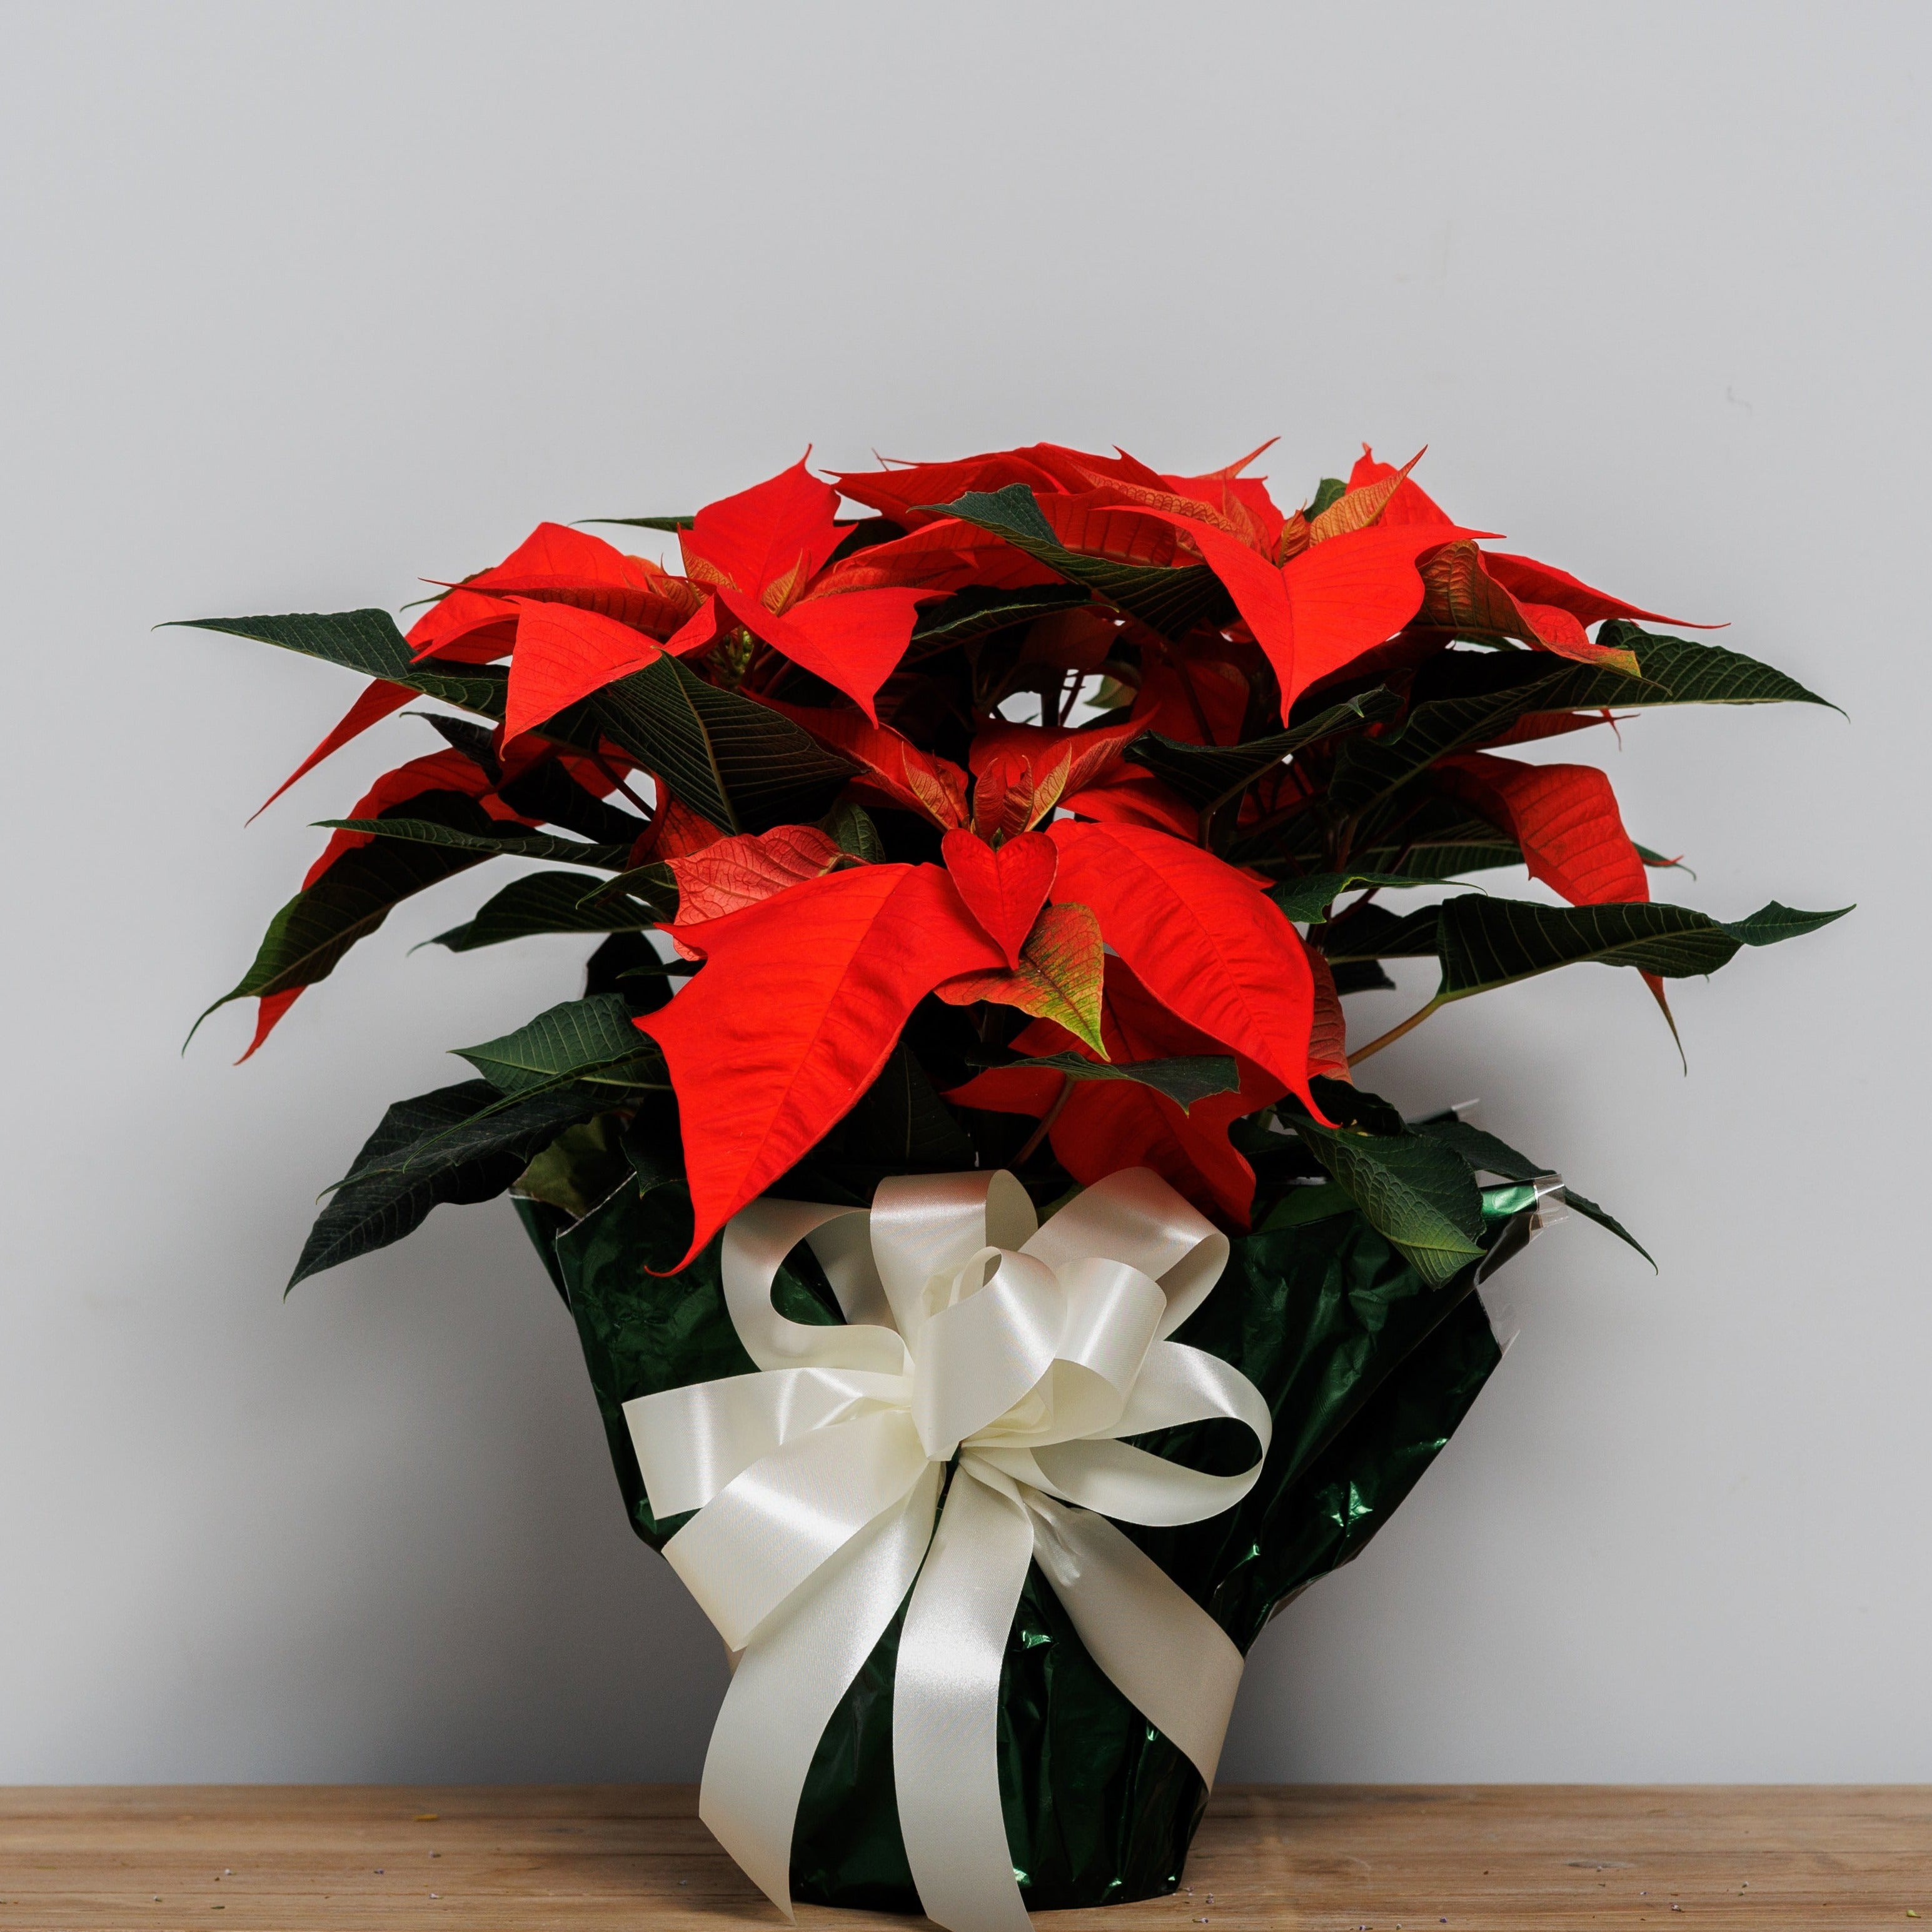 An orange poinsettia wrapped in green foil with a white bow.